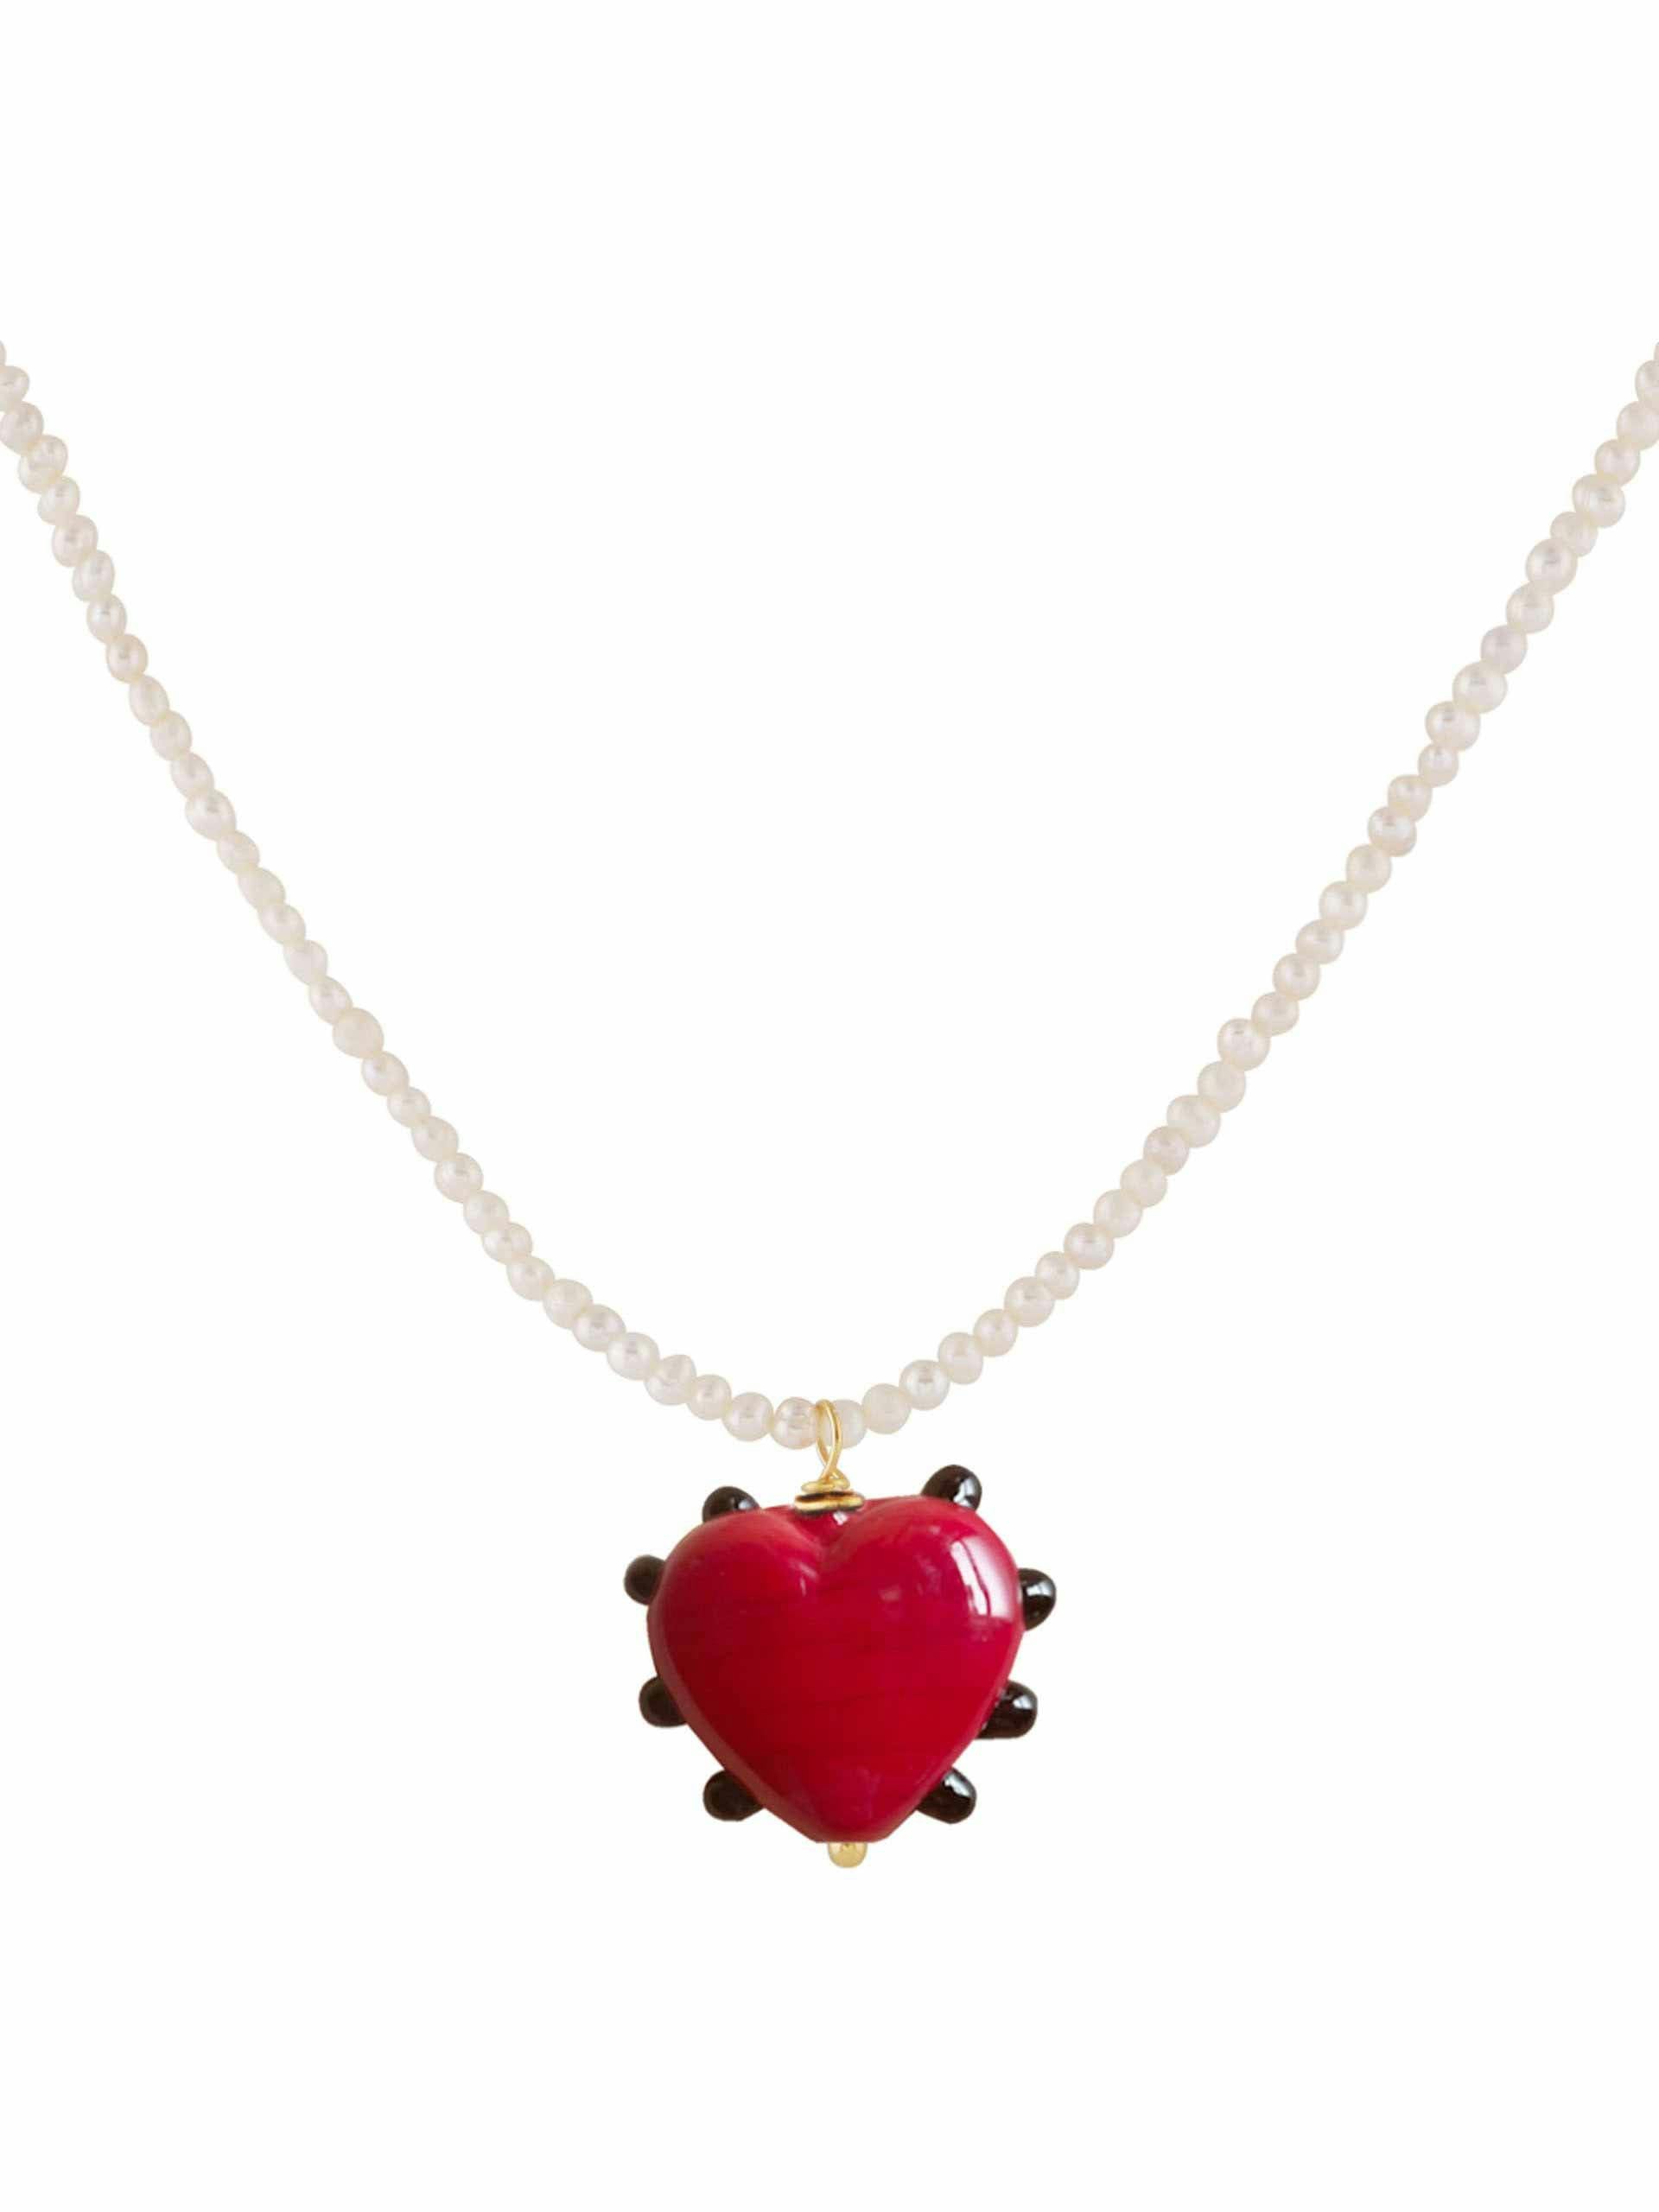 Milagros heart & pearl necklace